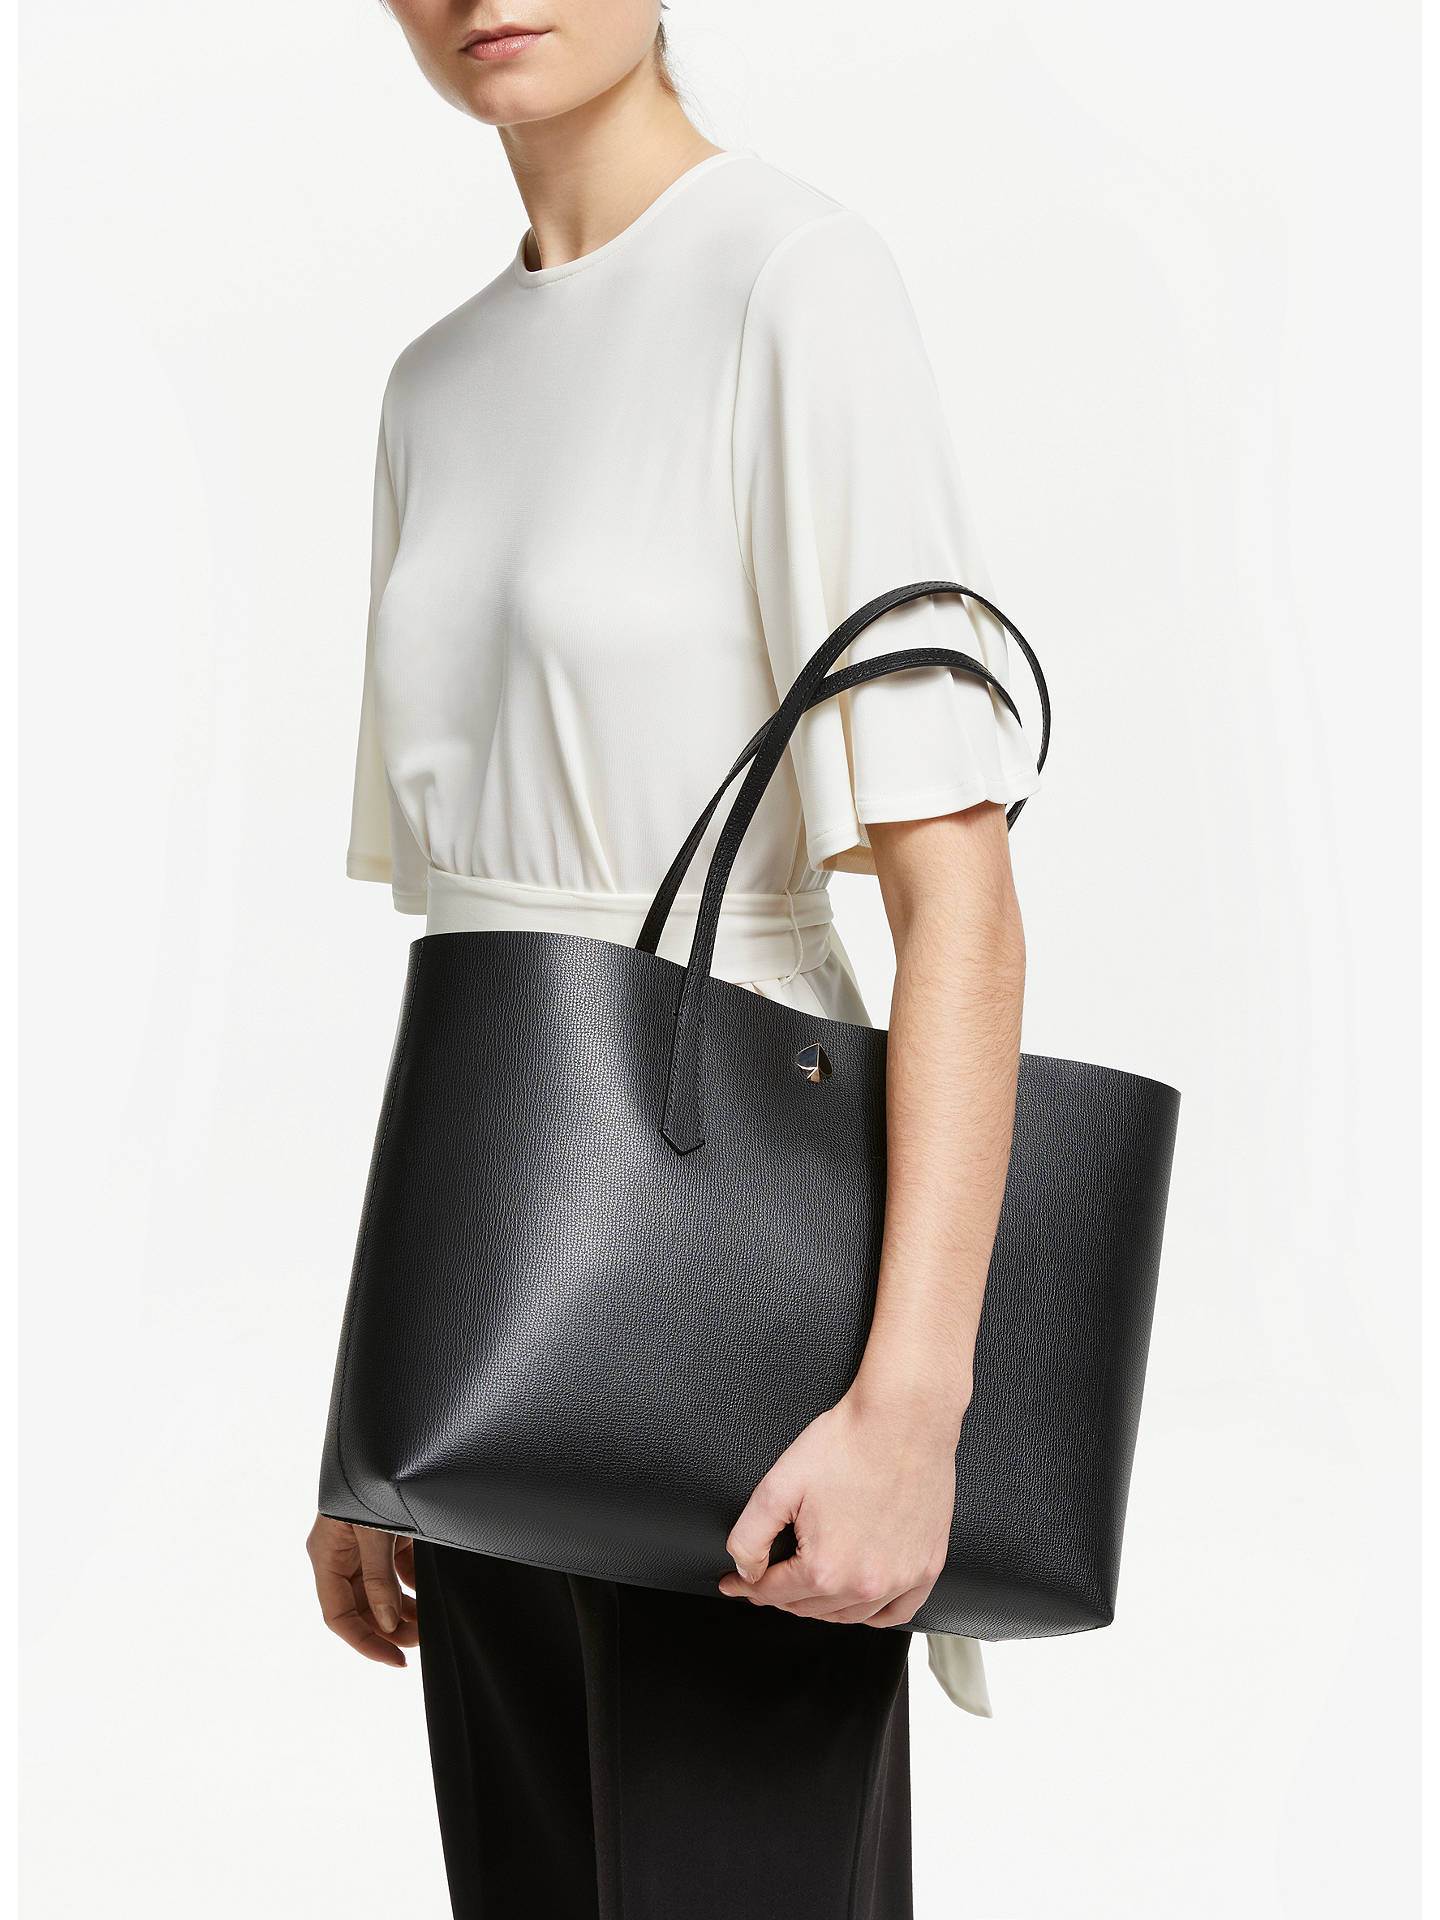 kate spade new york Molly Leather Large Tote Bag at John Lewis & Partners